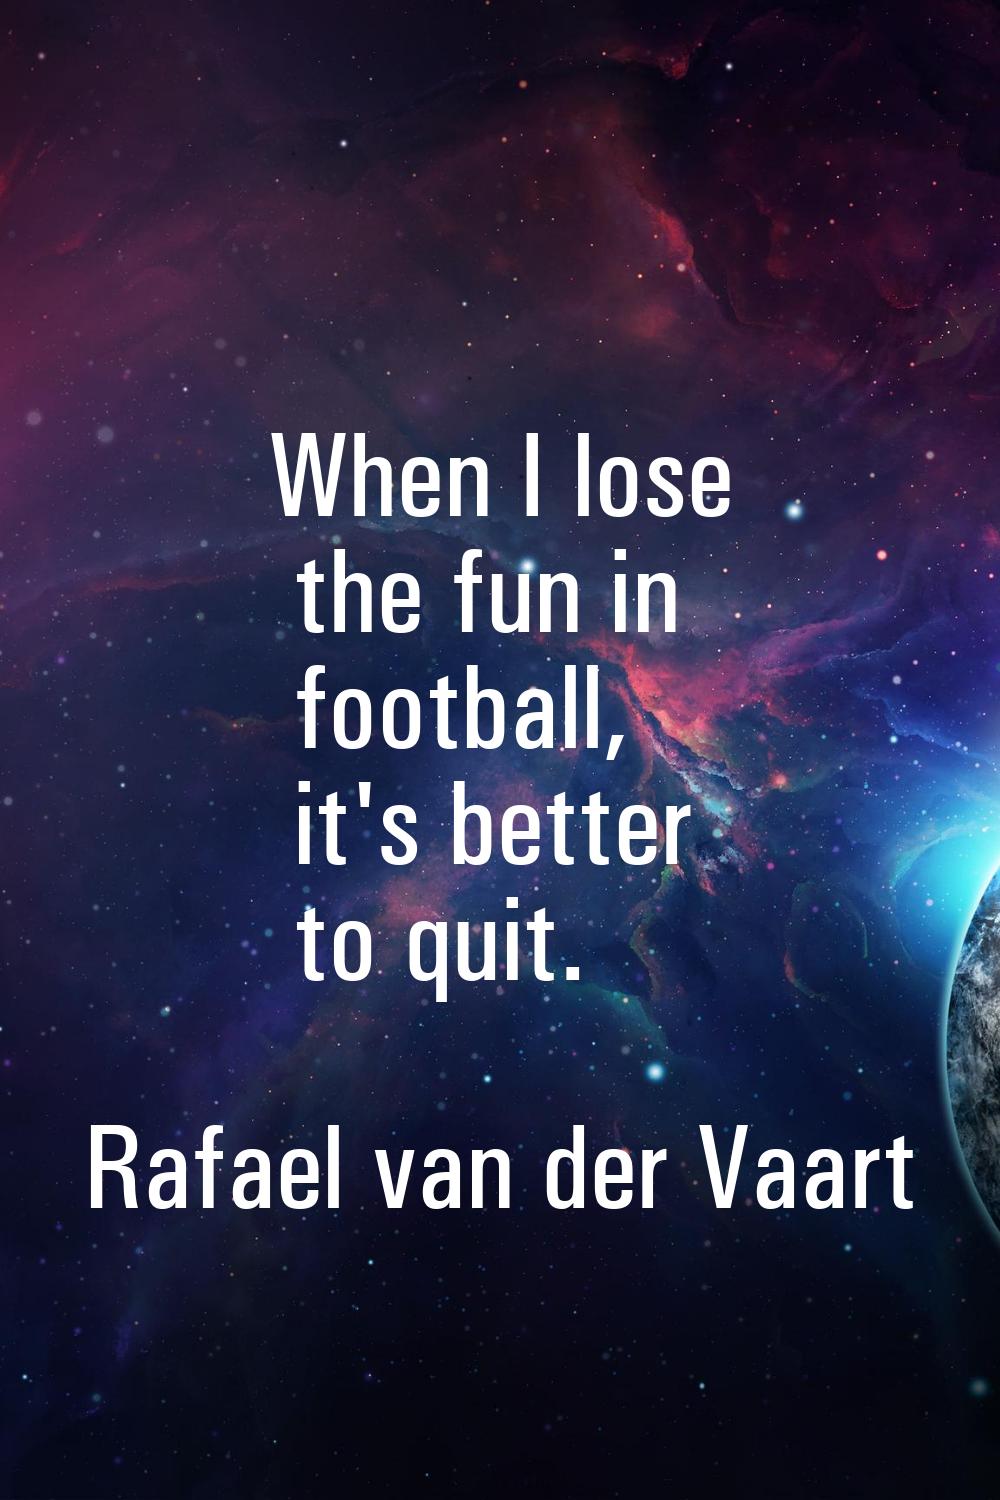 When I lose the fun in football, it's better to quit.